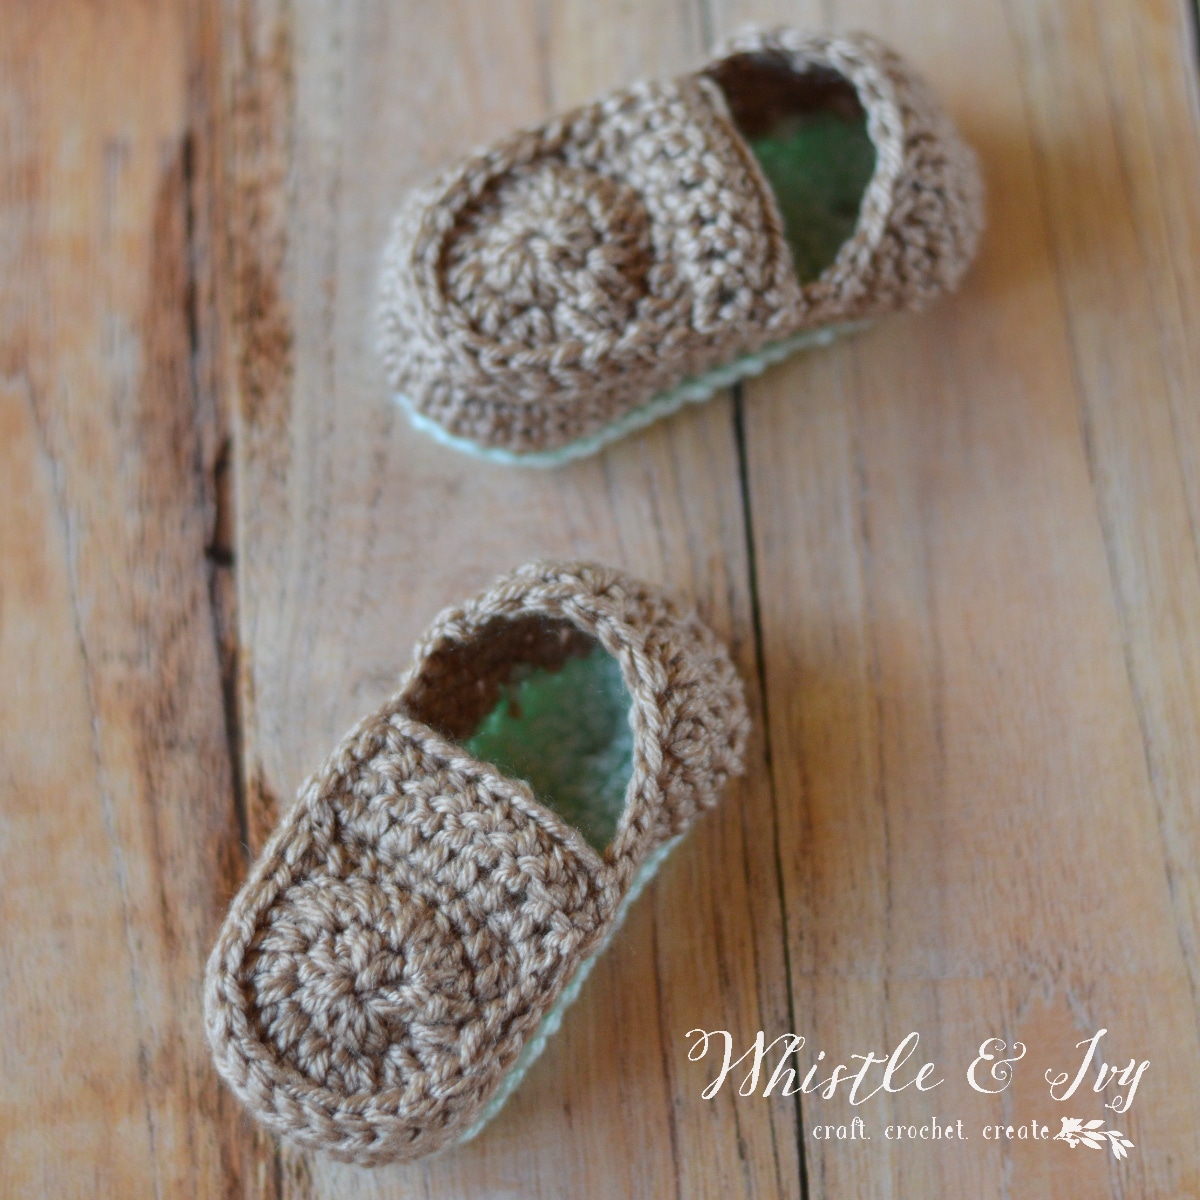 crochet pattern for baby loafer booties, cute gift idea for baby shower, simple and cute crochet baby shoes 